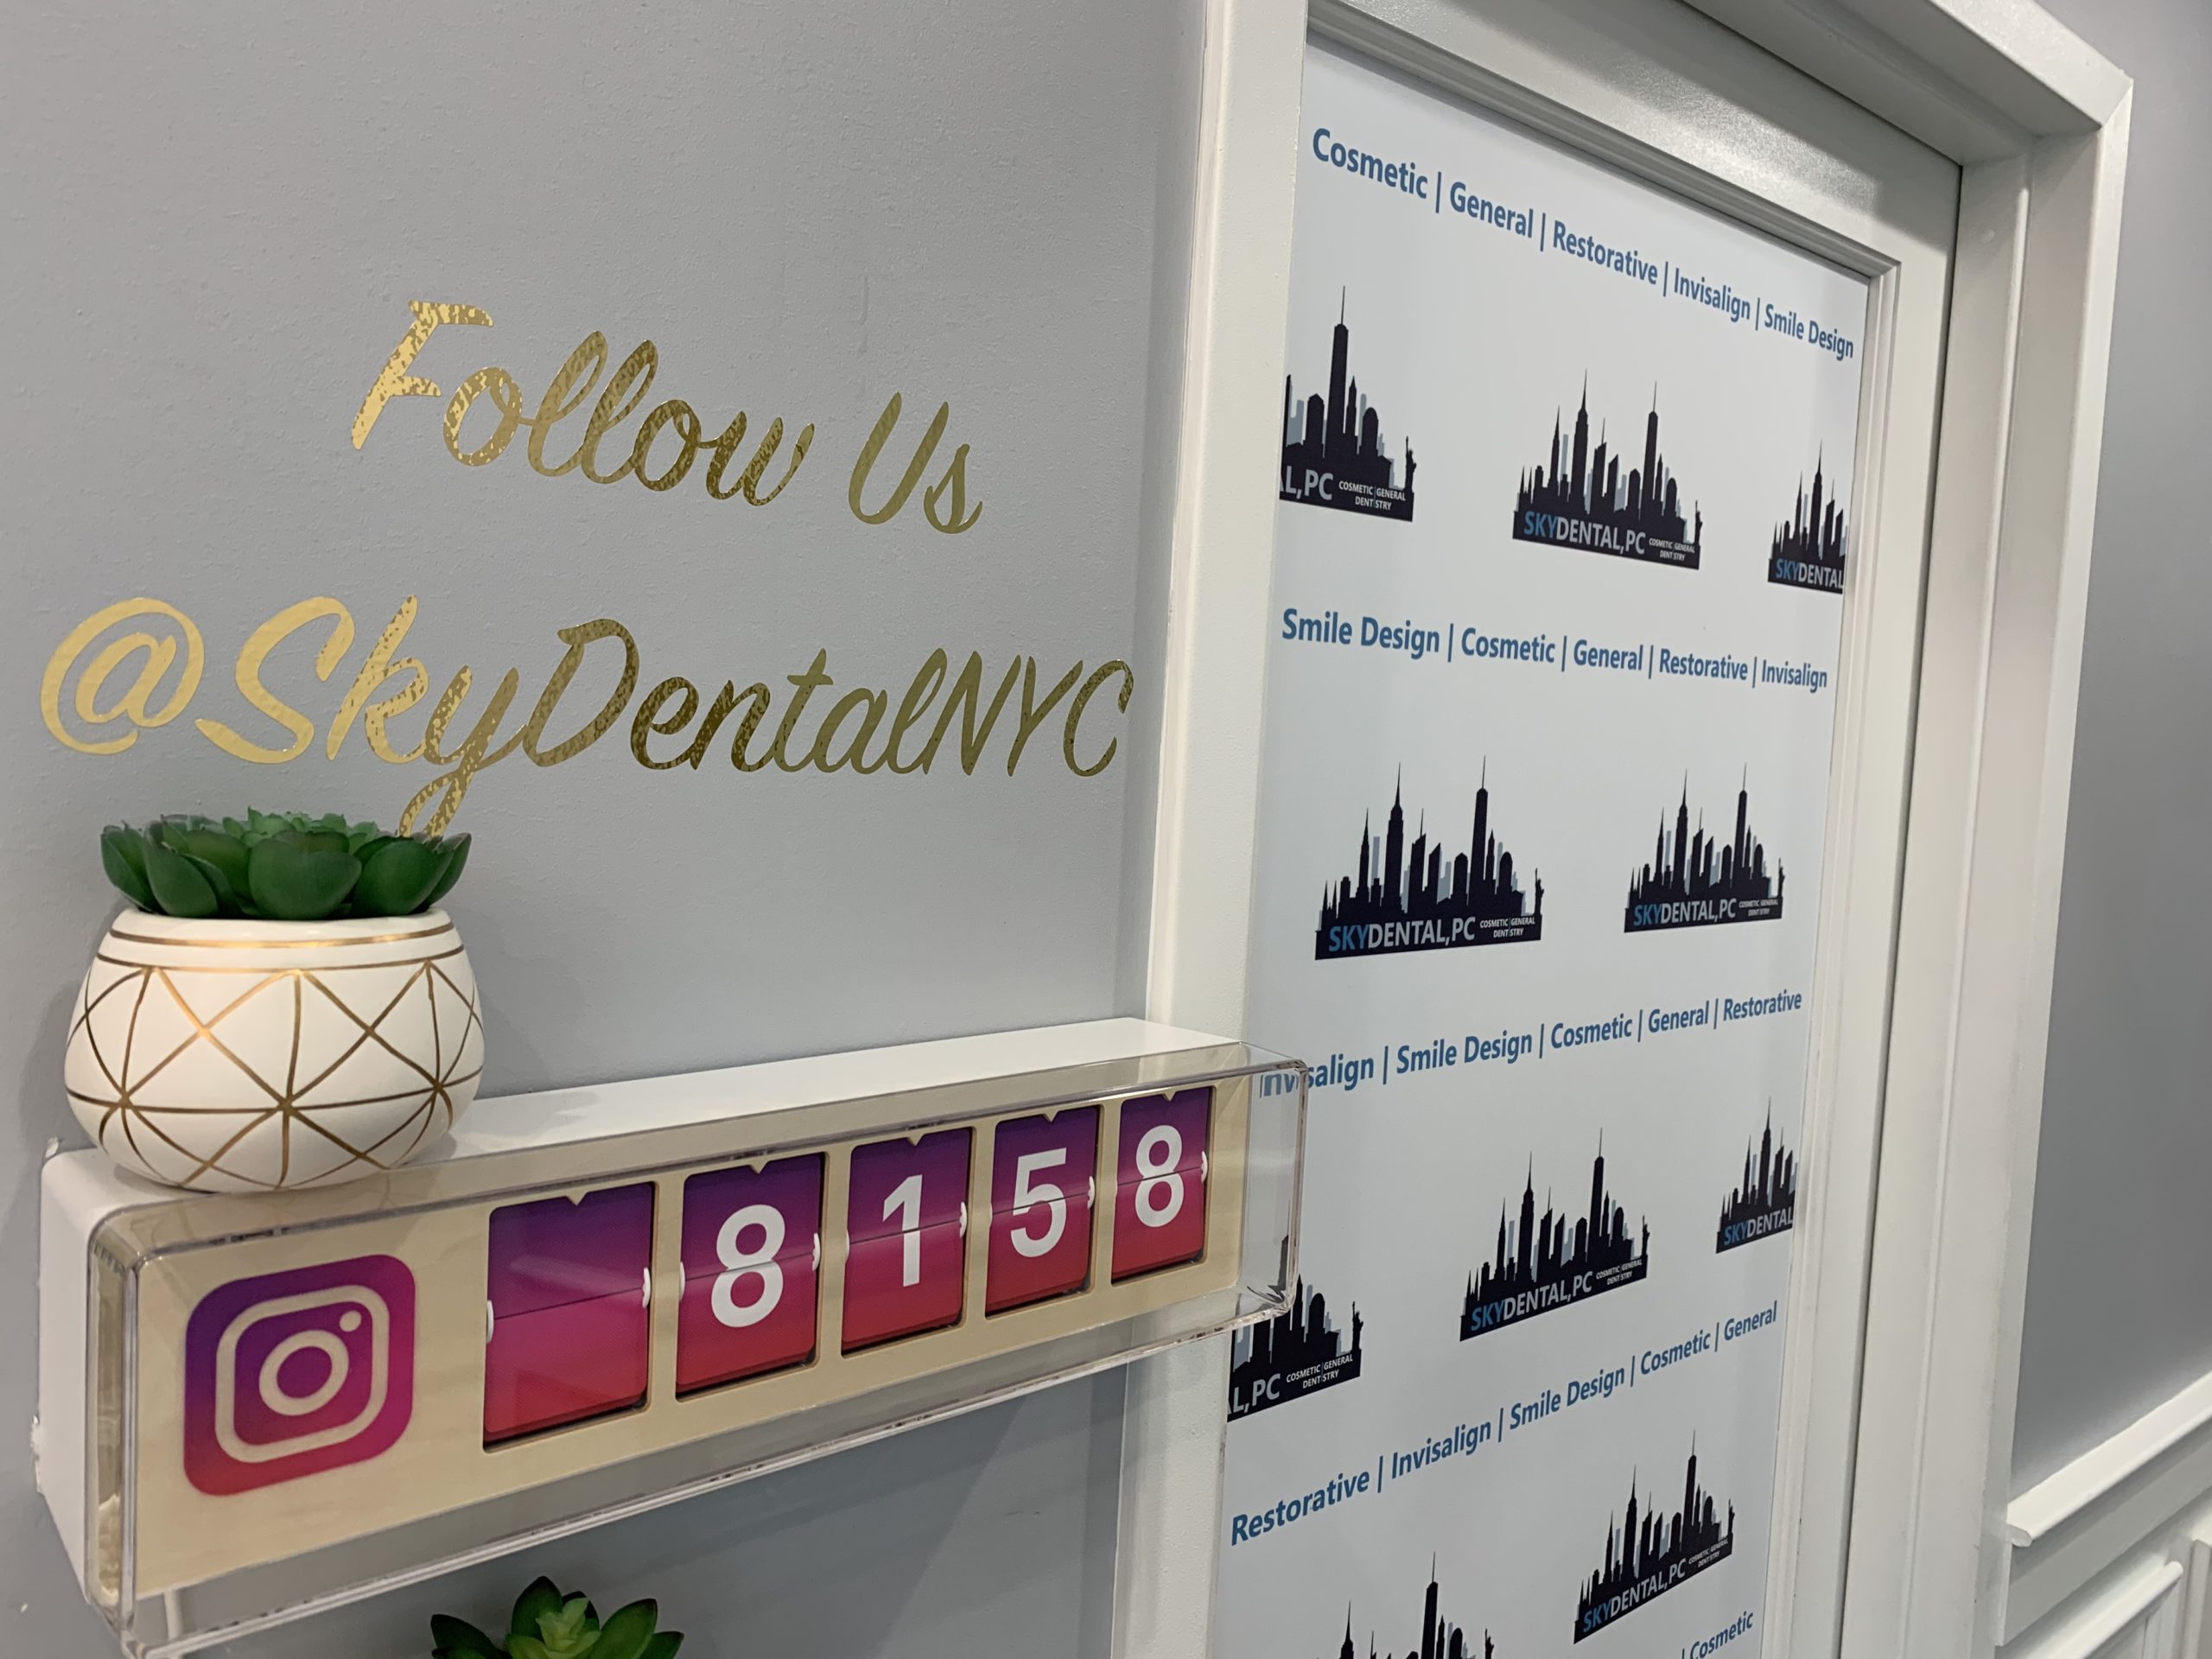 Sky Dental Instagram follower counter hangs on a wall in the office. It reads 8158. Above it on the wall, 